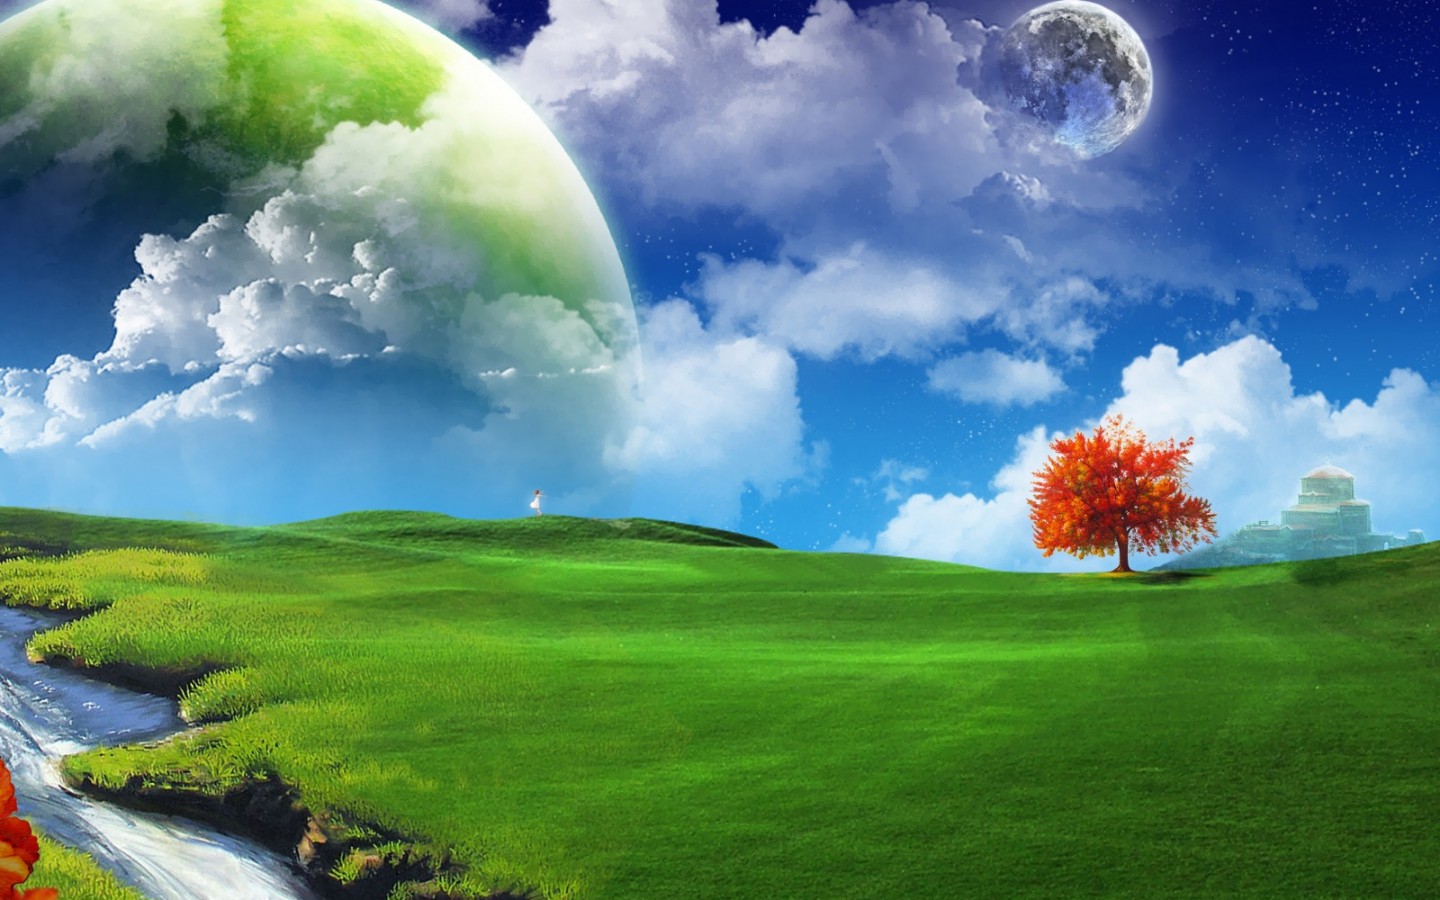 Wallpaper Nature Free HD Android Apps on Google Play - free nature wallpaper for android